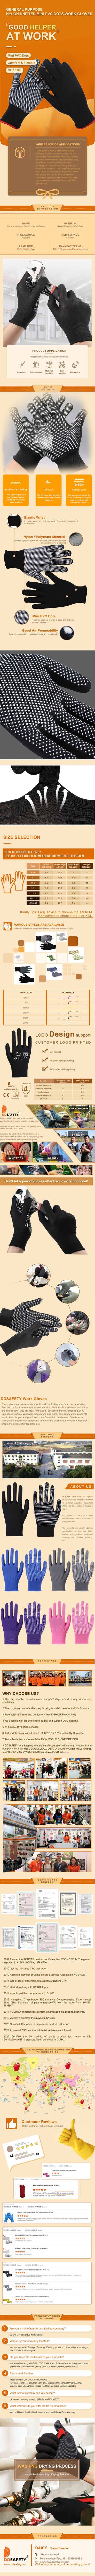 Safety Protection Gloves, Nylon Knitted Stretchy Dotted Pvc Gloves - DKP428 Safety Protection Gloves, Nylon Knitted Stretchy Dotted Pvc Gloves - DKP428 gloves,work gloves,nylon gloves,pvc dotted gloves,nylon work gloves